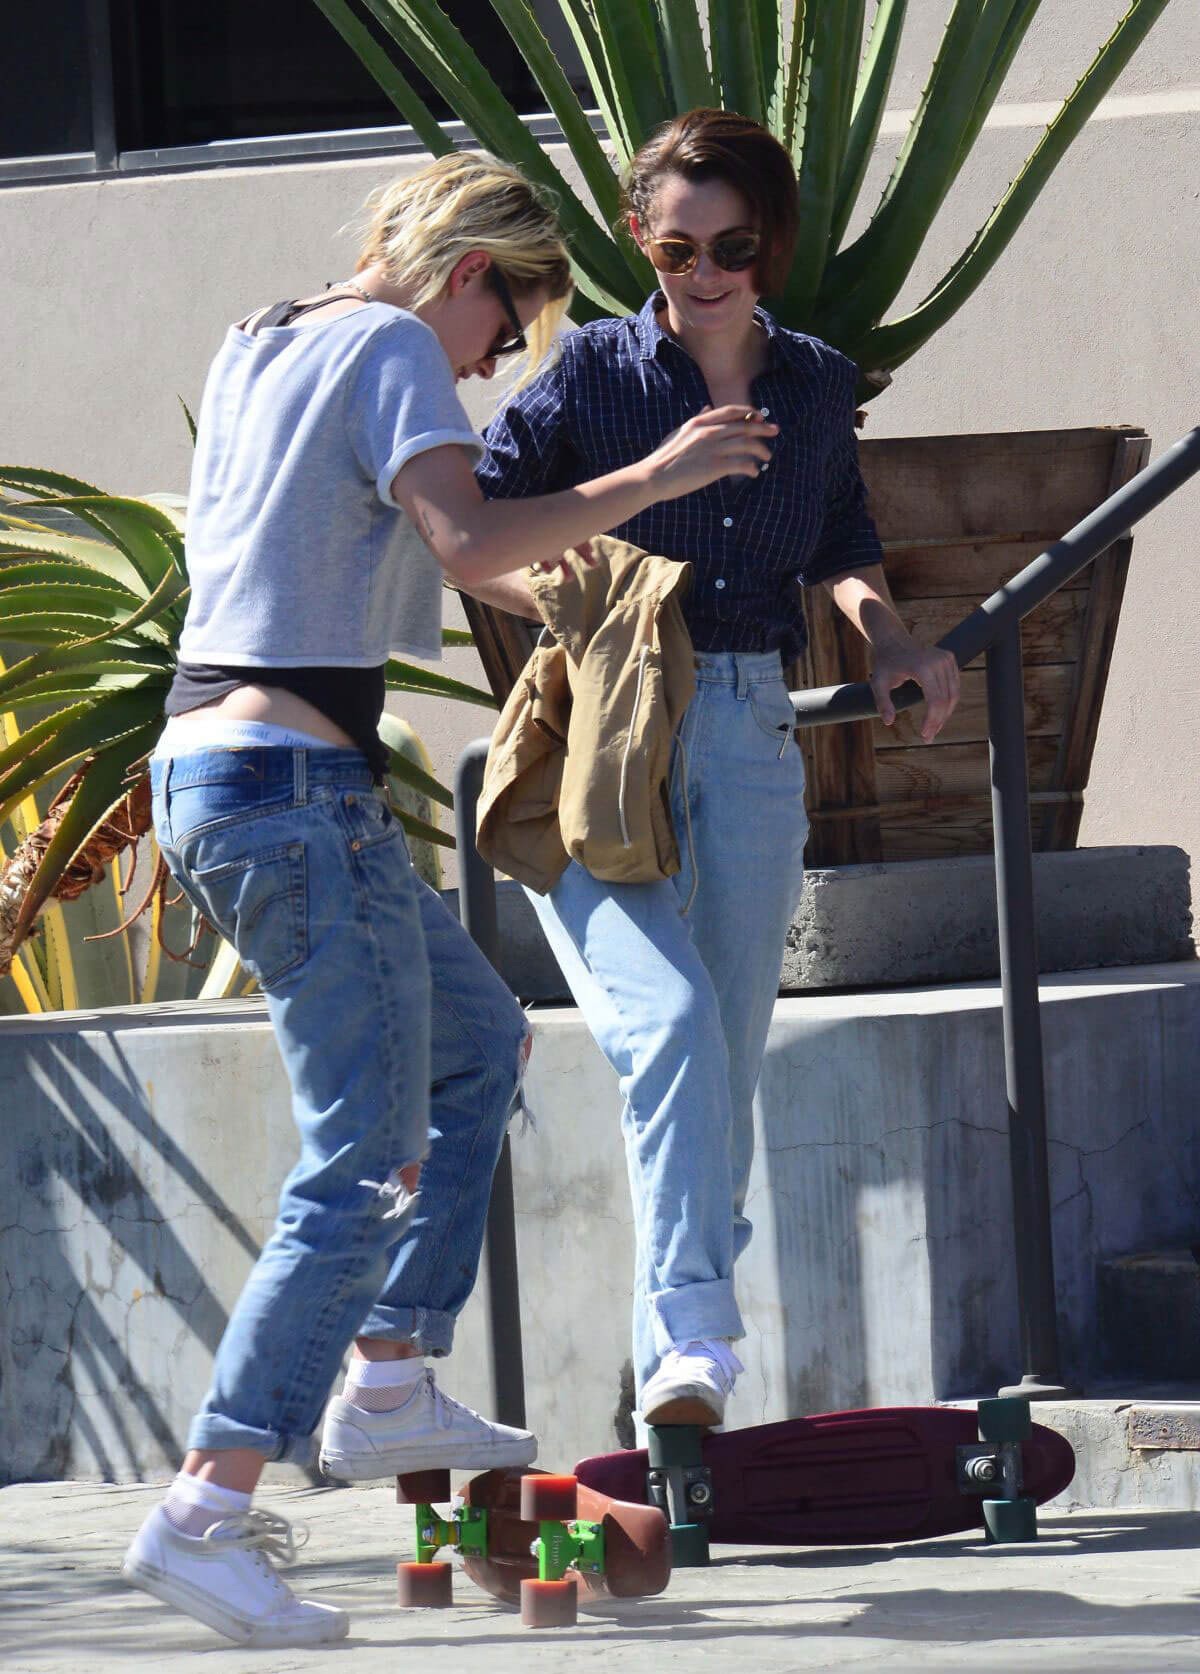 Kristen Stewart in Ripped Jeans Out in West Hollywood - 16/09/2016 14